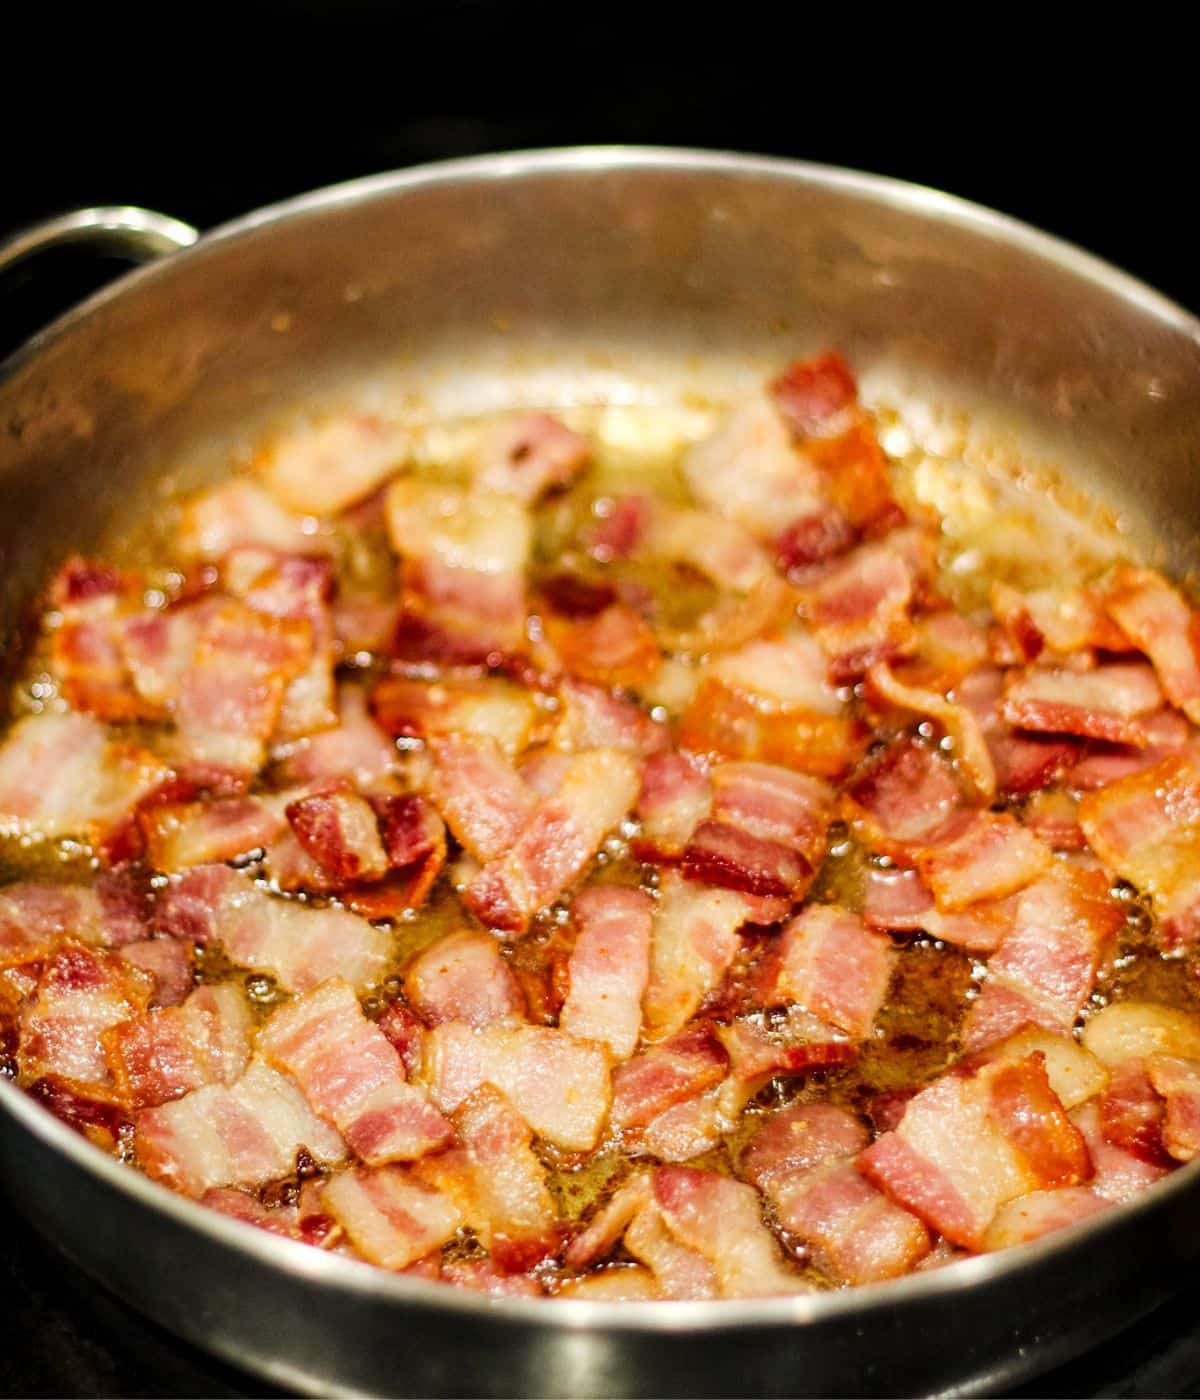 Cooking the bacon until golden brown and crispy.